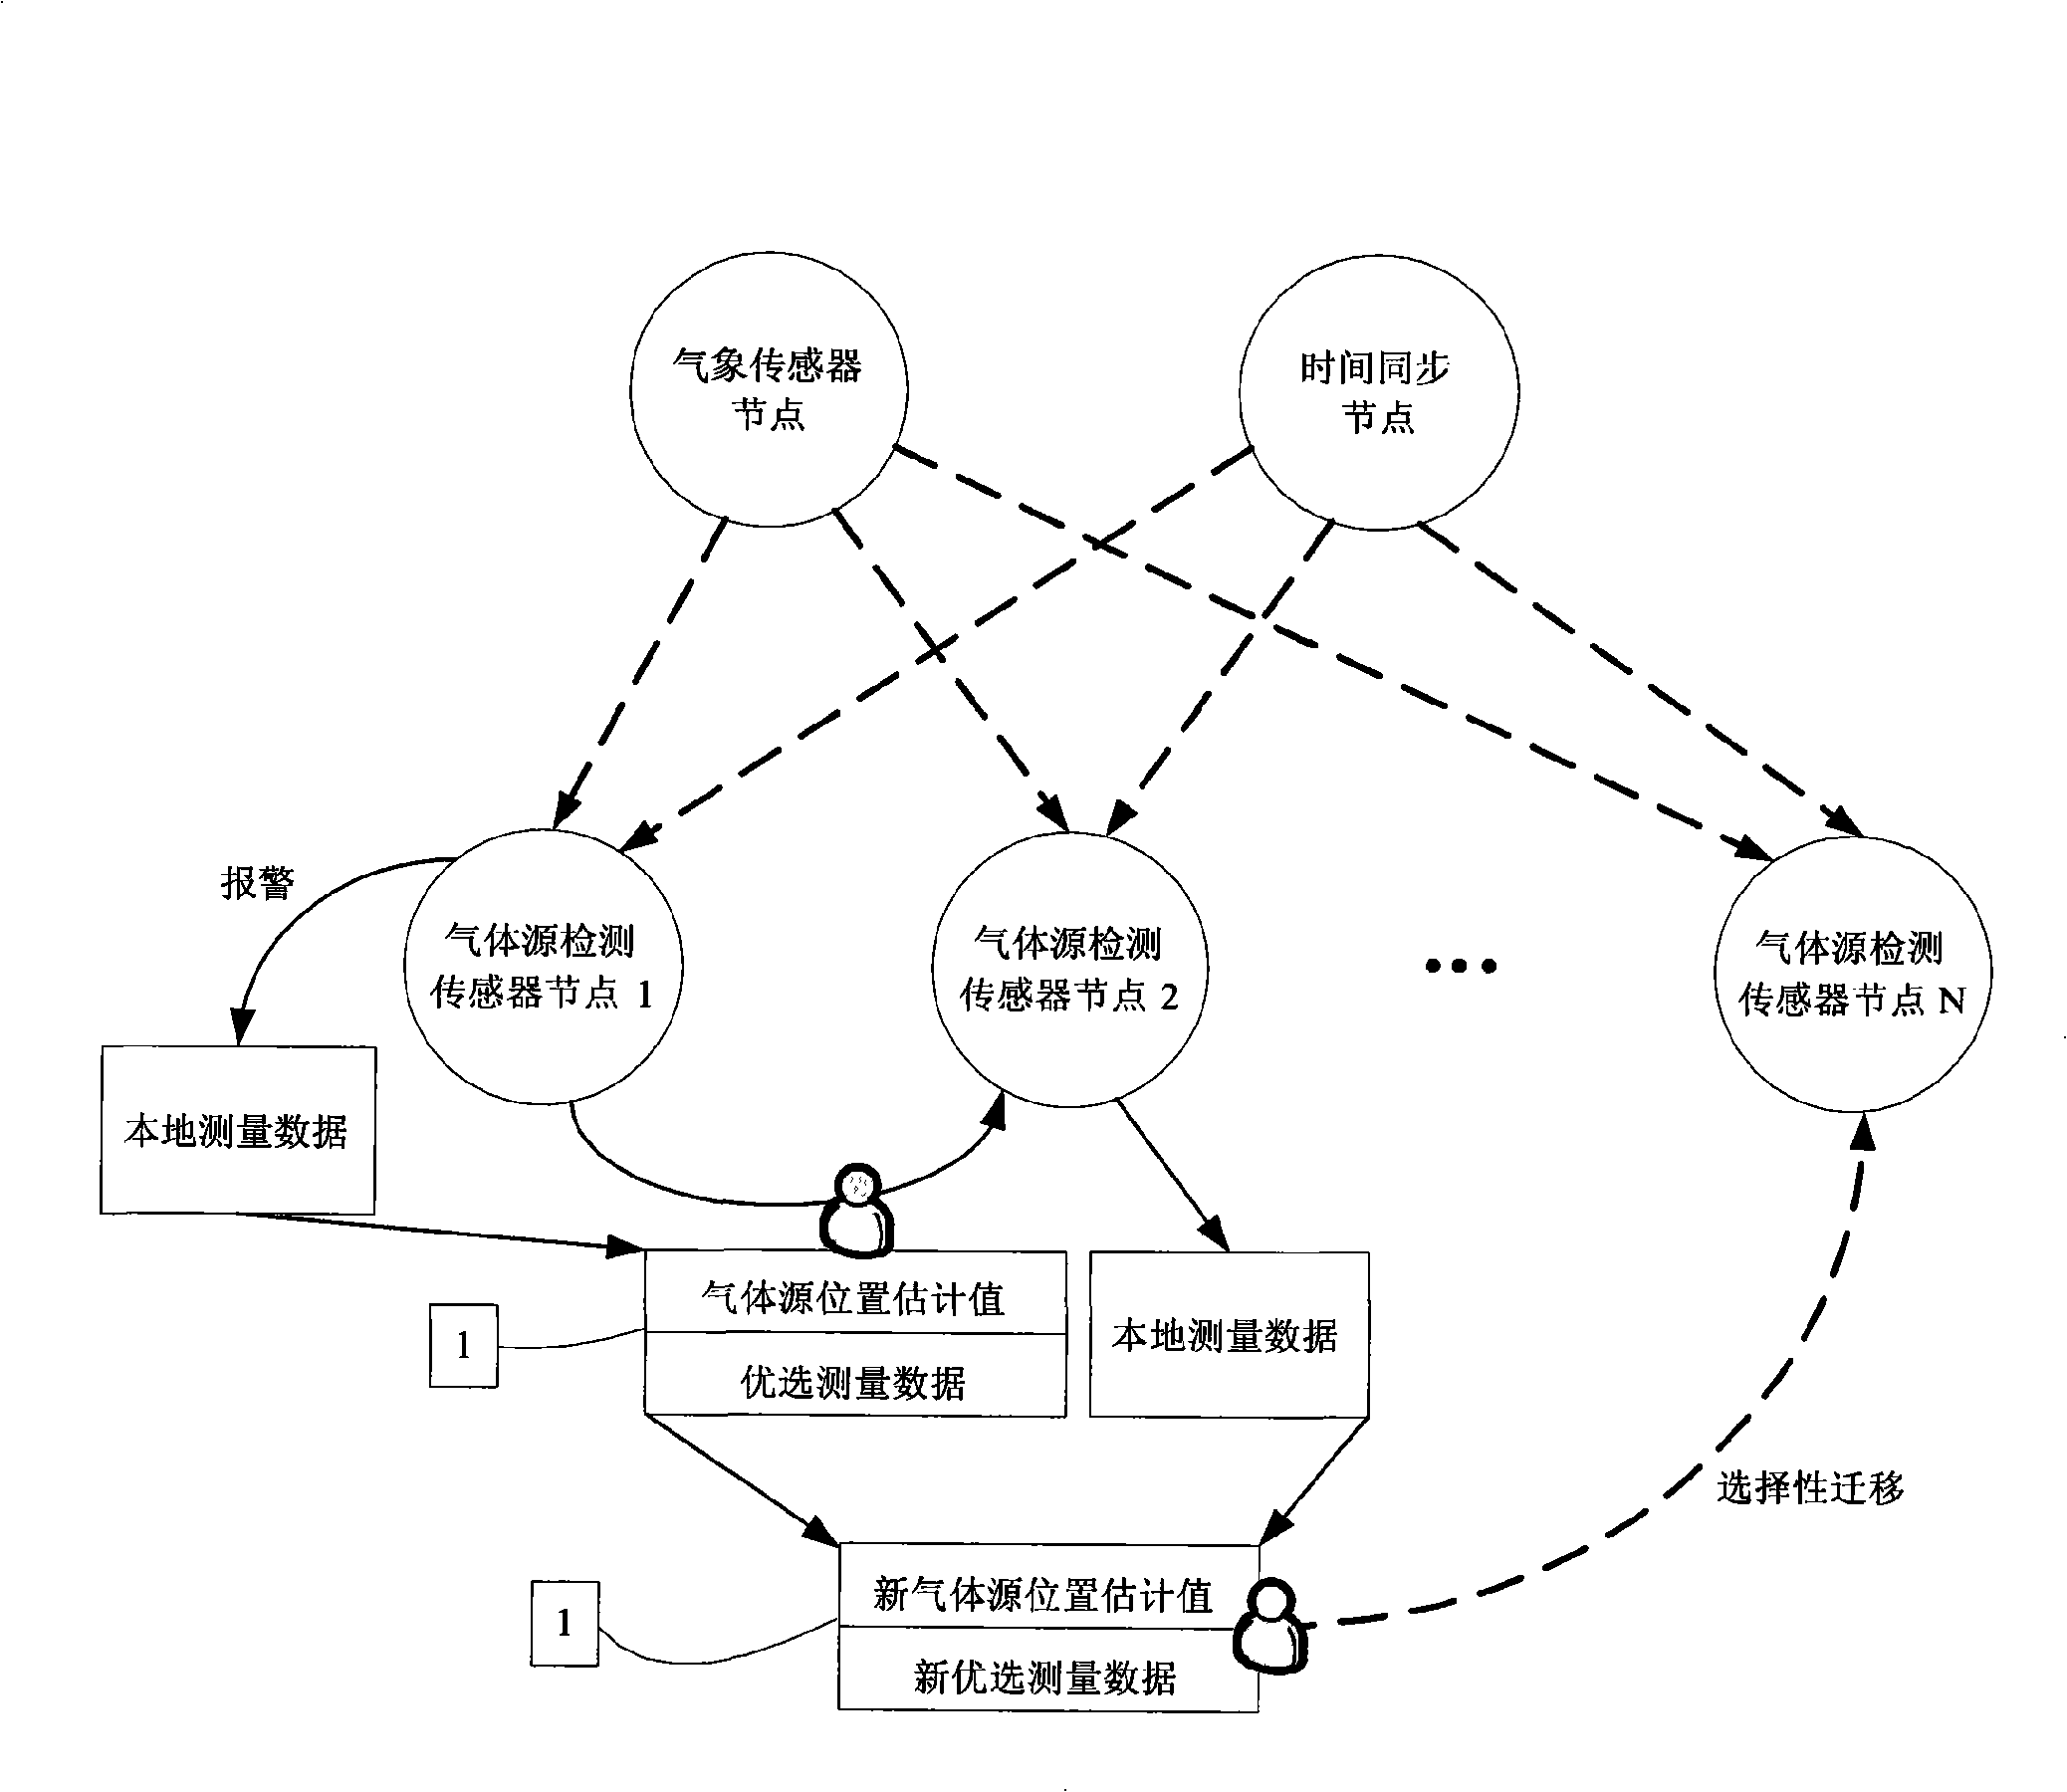 Synergic positioning system and method for wireless sensor network diffusion gas source base on mobile agent